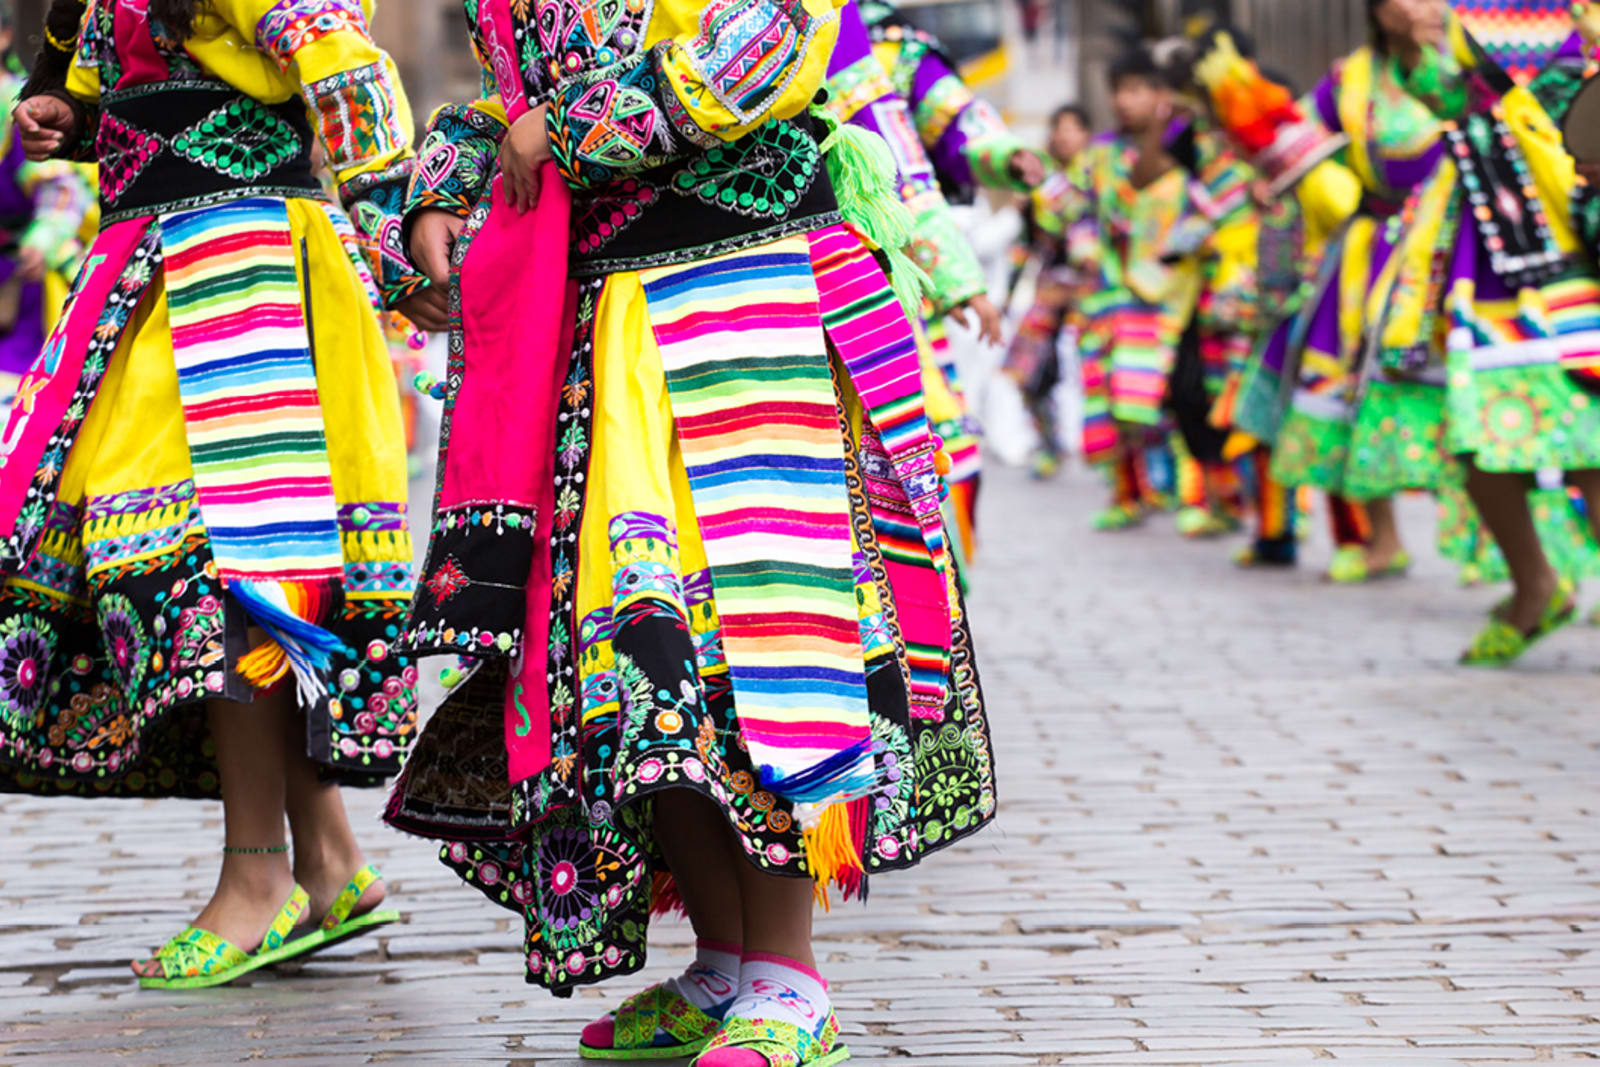 Peruvian dancers in traditional clothing during the Inti Raymi festival